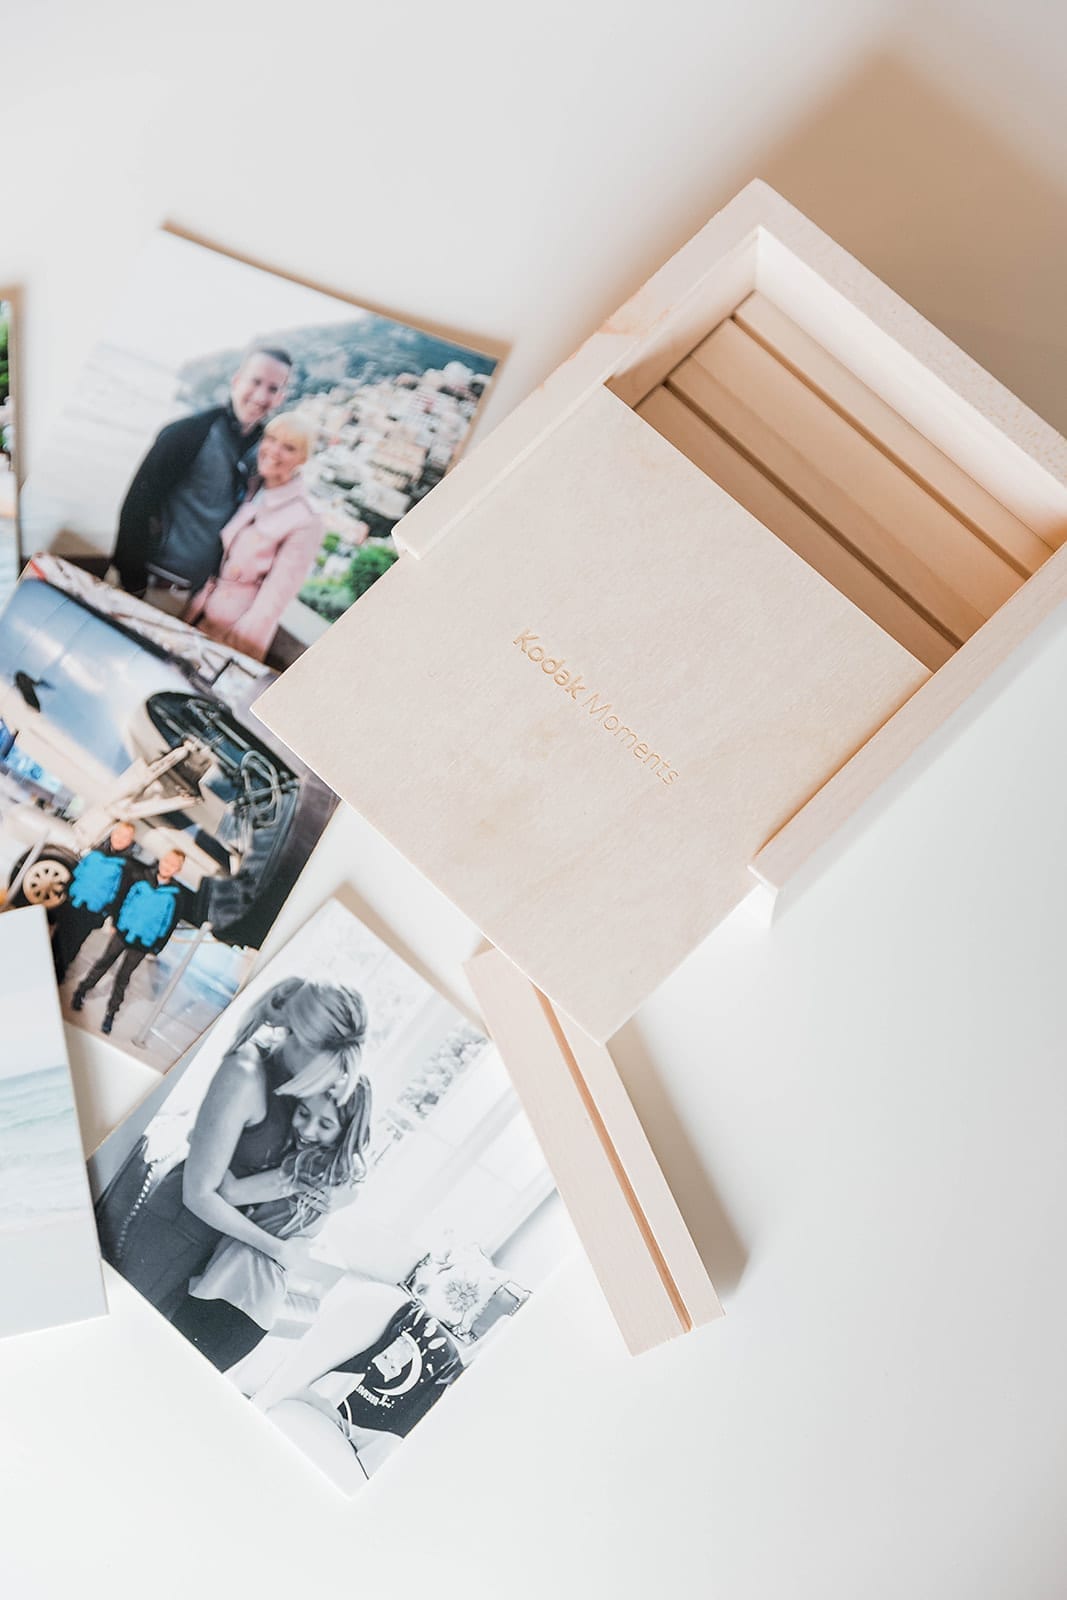 Looking for creative photo display ideas? This box is the bomb! Print ten photos once and change them all year to display!